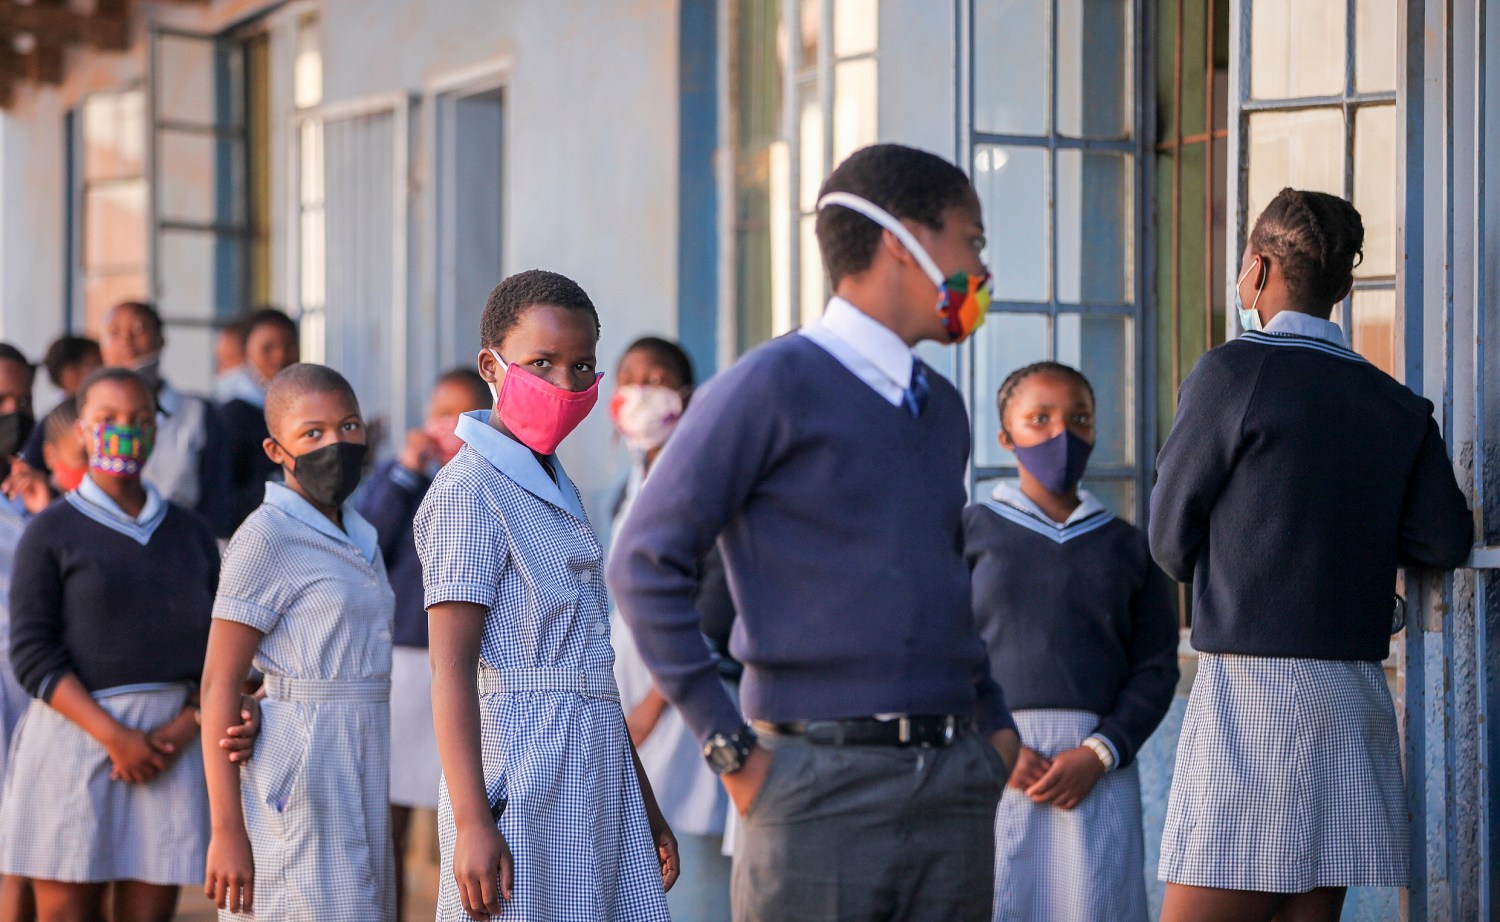 DURBAN, SOUTH AFRICA- Students return to classrooms, amid the easing of quarantine and the gradual opening of the country in Durban, South Africa on June 8, 2020. Since March 19, the beginning of strict confinement decreed by the president Cyril Ramaphosa to combat the covid-19 pandemic, South African schools had been closed. By virtue of a relaxation, this Monday (8) the secondary classes were officially resumed throughout the territory. (NO RESALE)